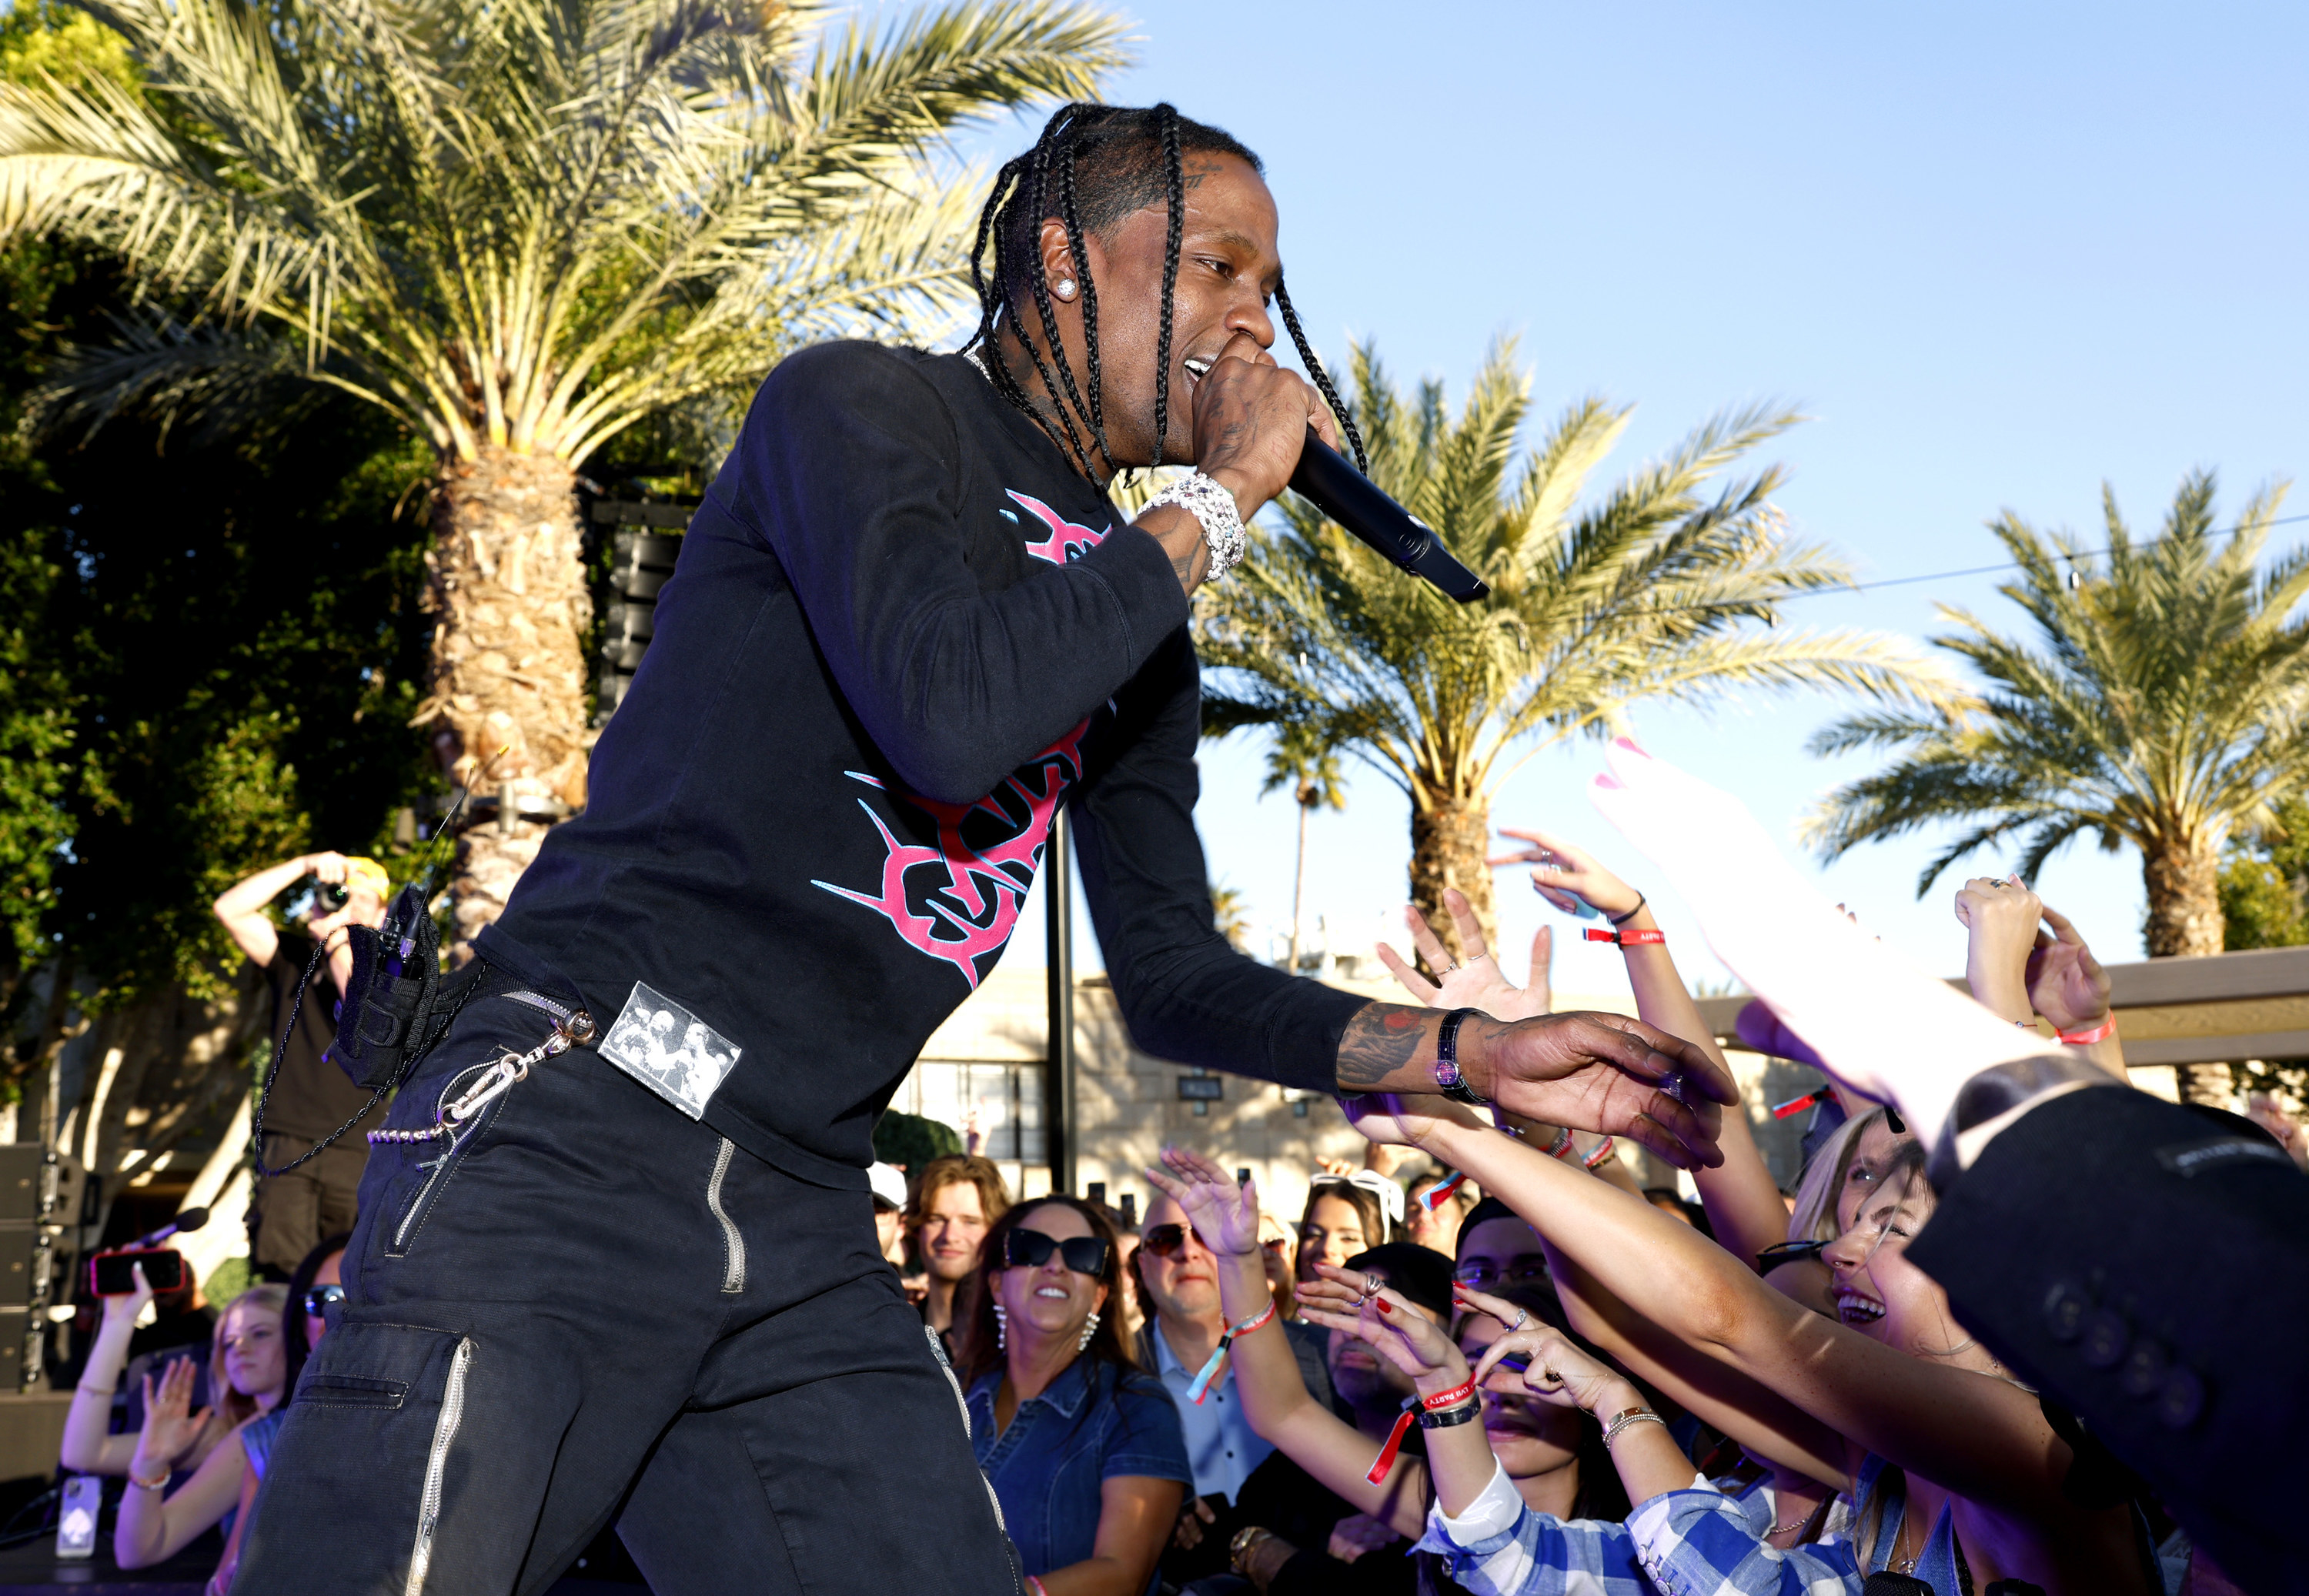 Travis interacting with the crowd at an outdoor performance